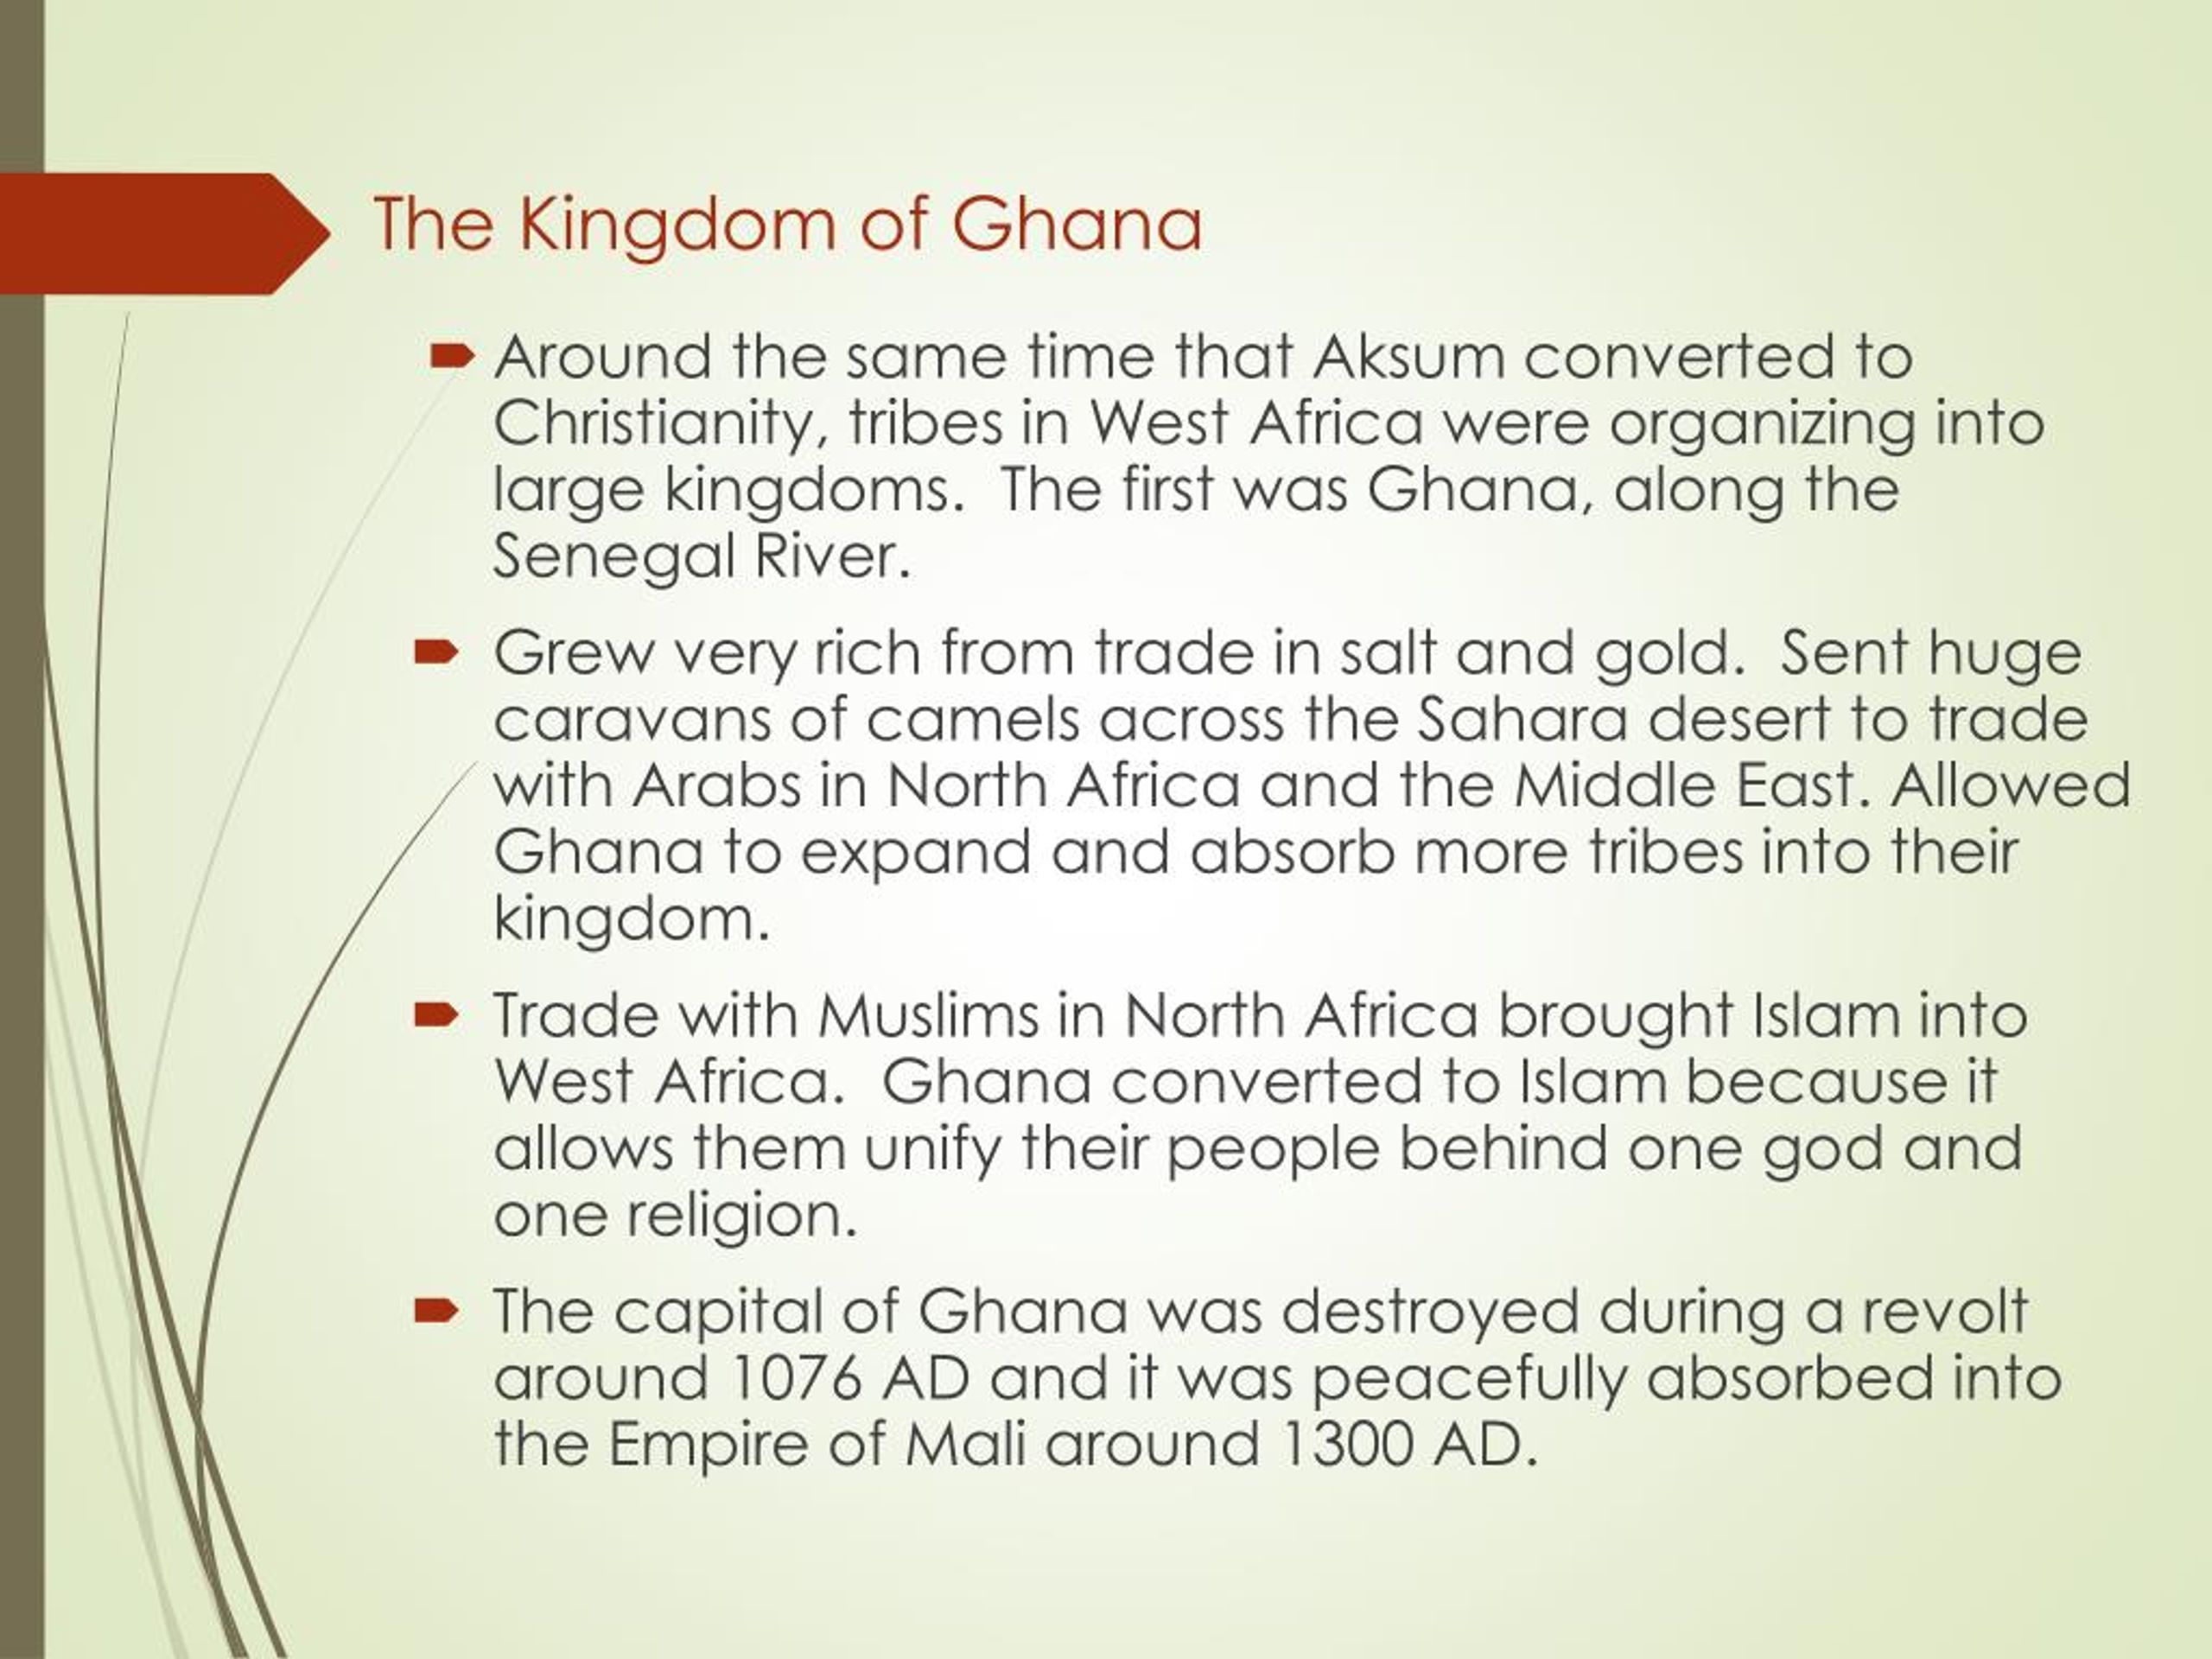 the original reason for the rise of the kingdom of ghana was